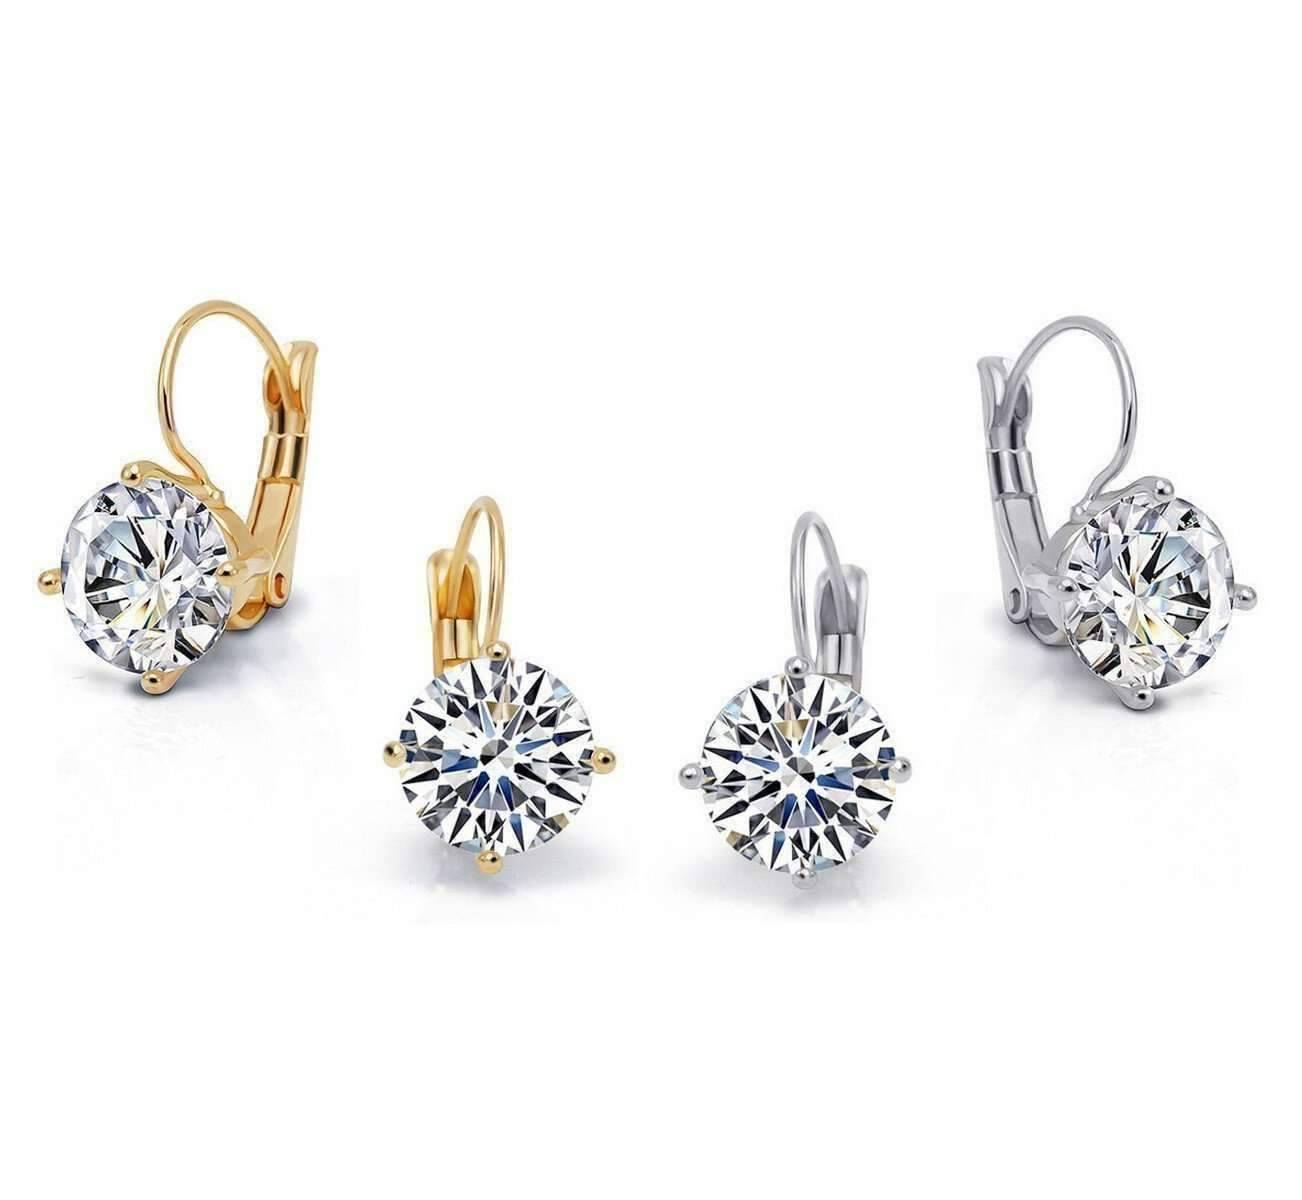 Feshionn IOBI Earrings Bold 7 CTW Solitaire Leverback Earrings in Yellow, Rose or White Gold